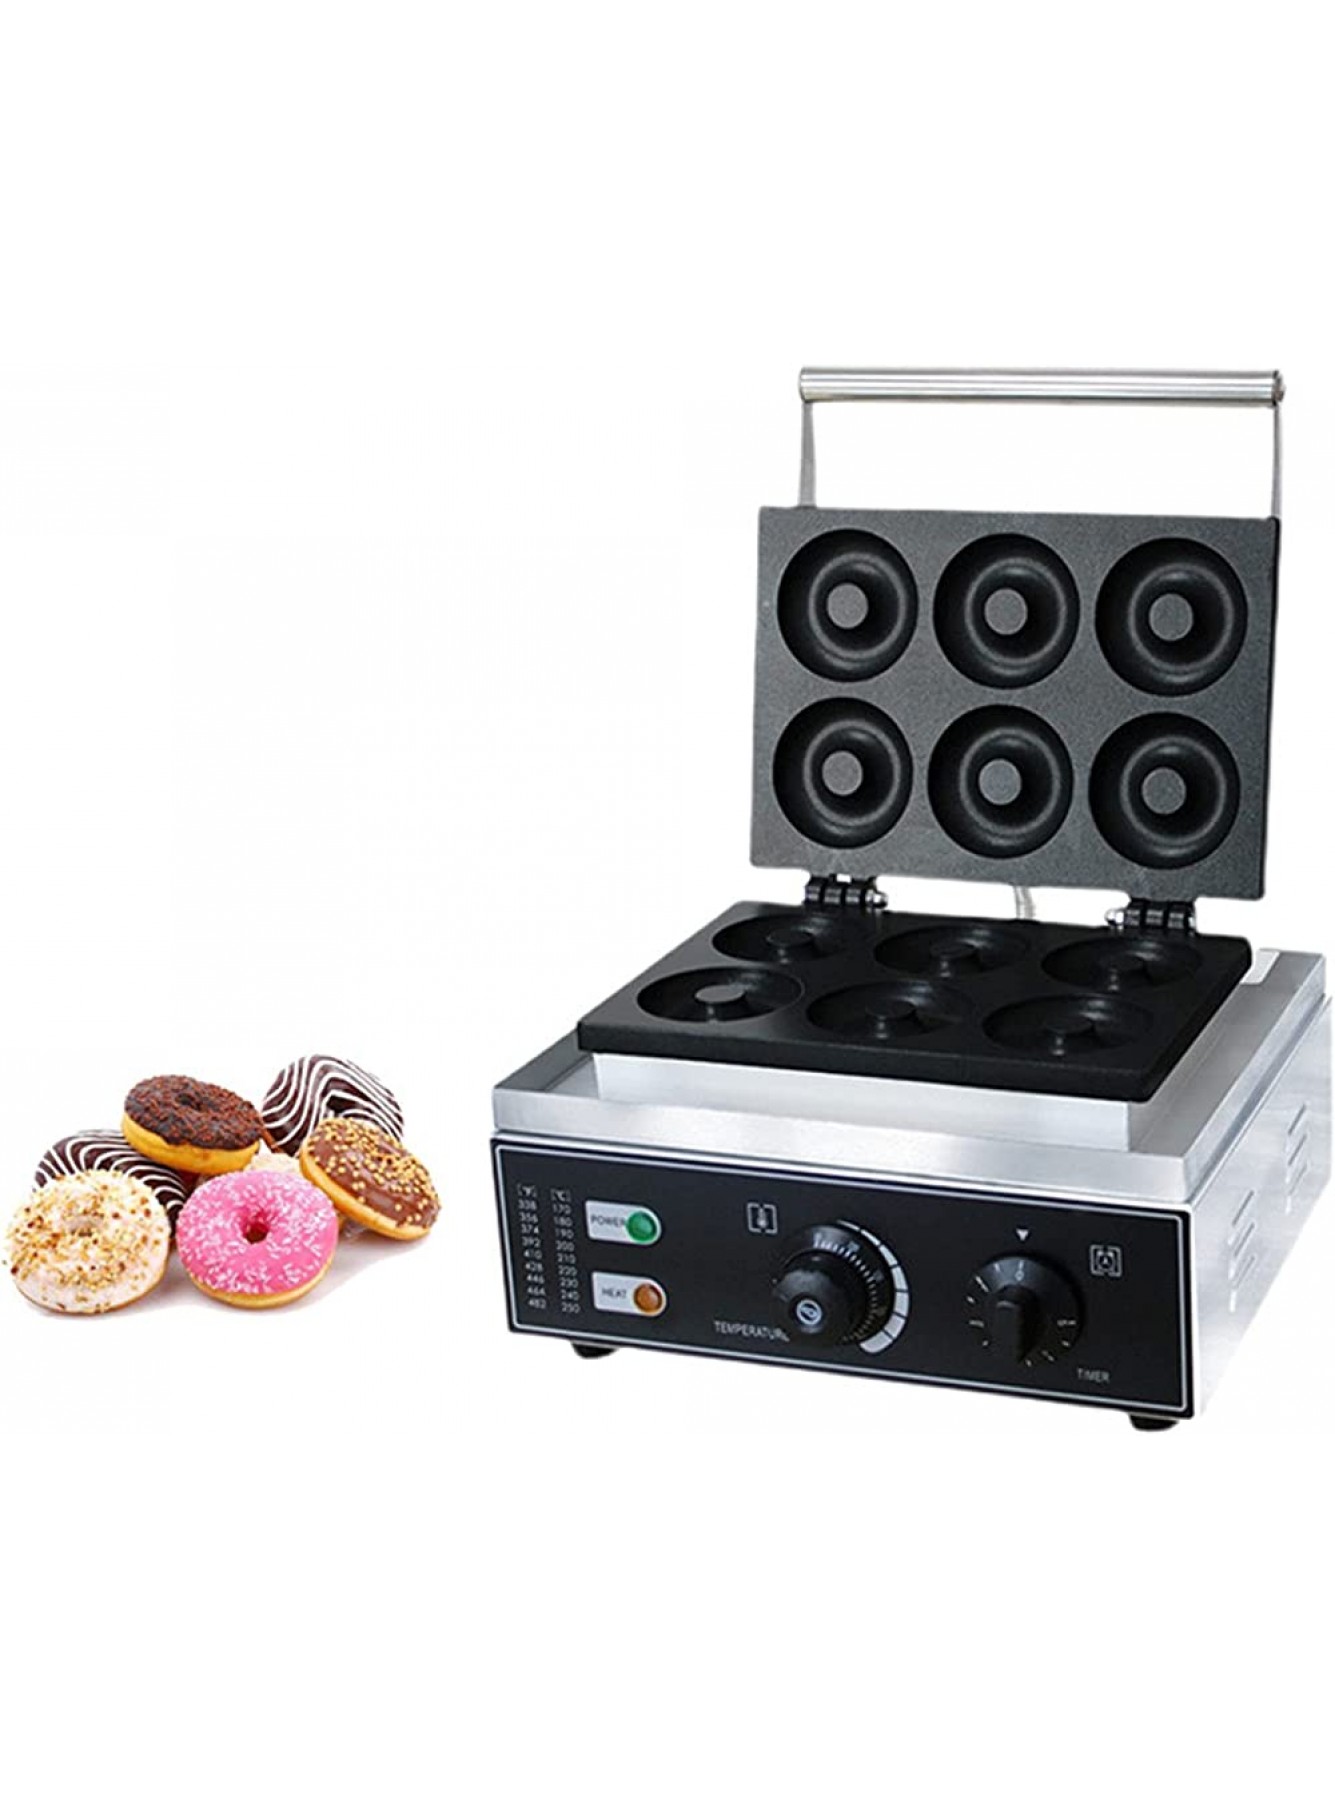 Stainless Steel Donut Machine 6 Holes Double Sided Heating 50-300℃ 1550W Non Stick Donut Machine for Professional Kitchen - PGQQHN0X